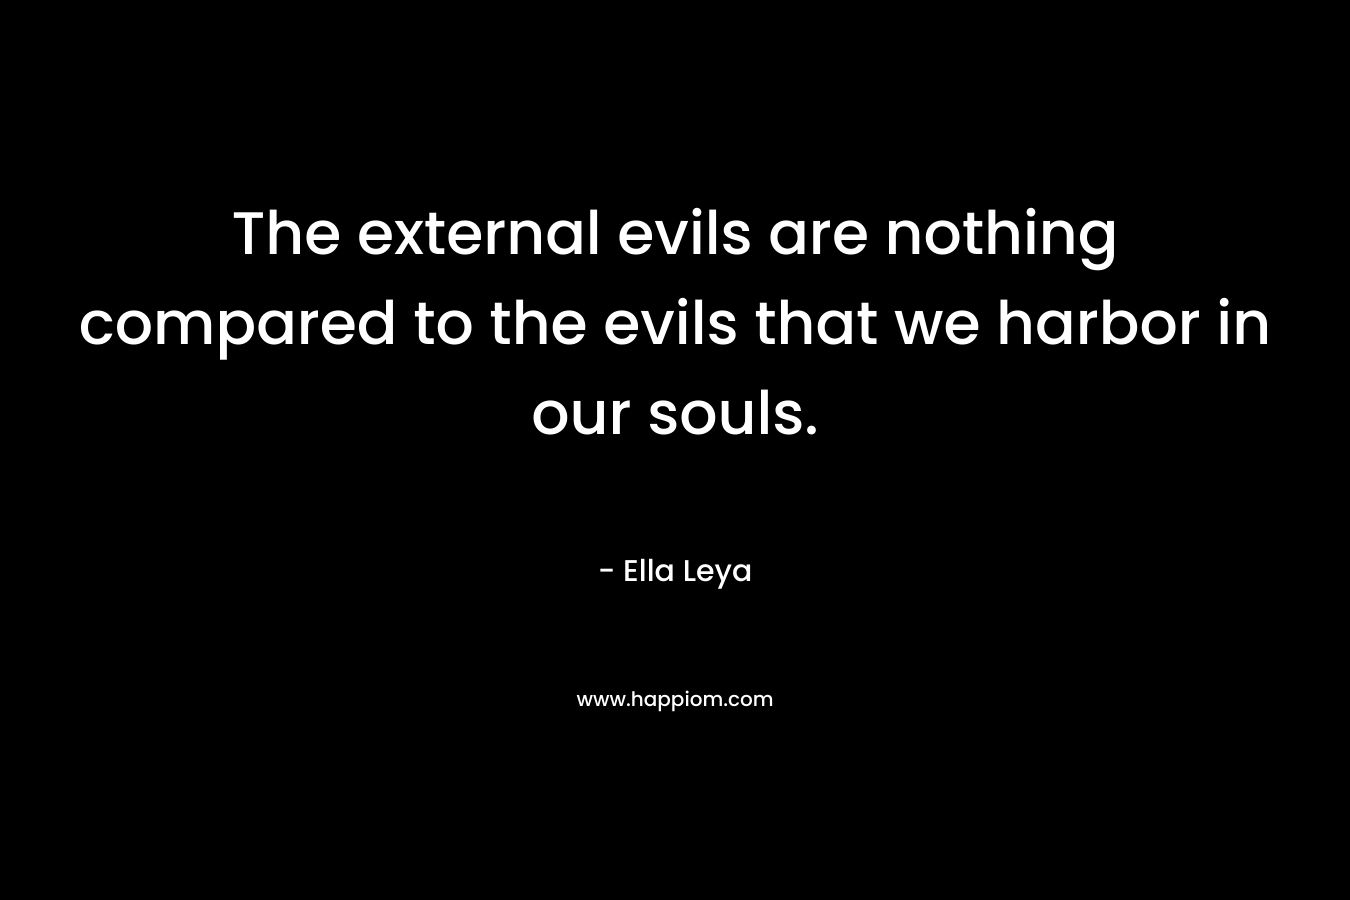 The external evils are nothing compared to the evils that we harbor in our souls. – Ella Leya